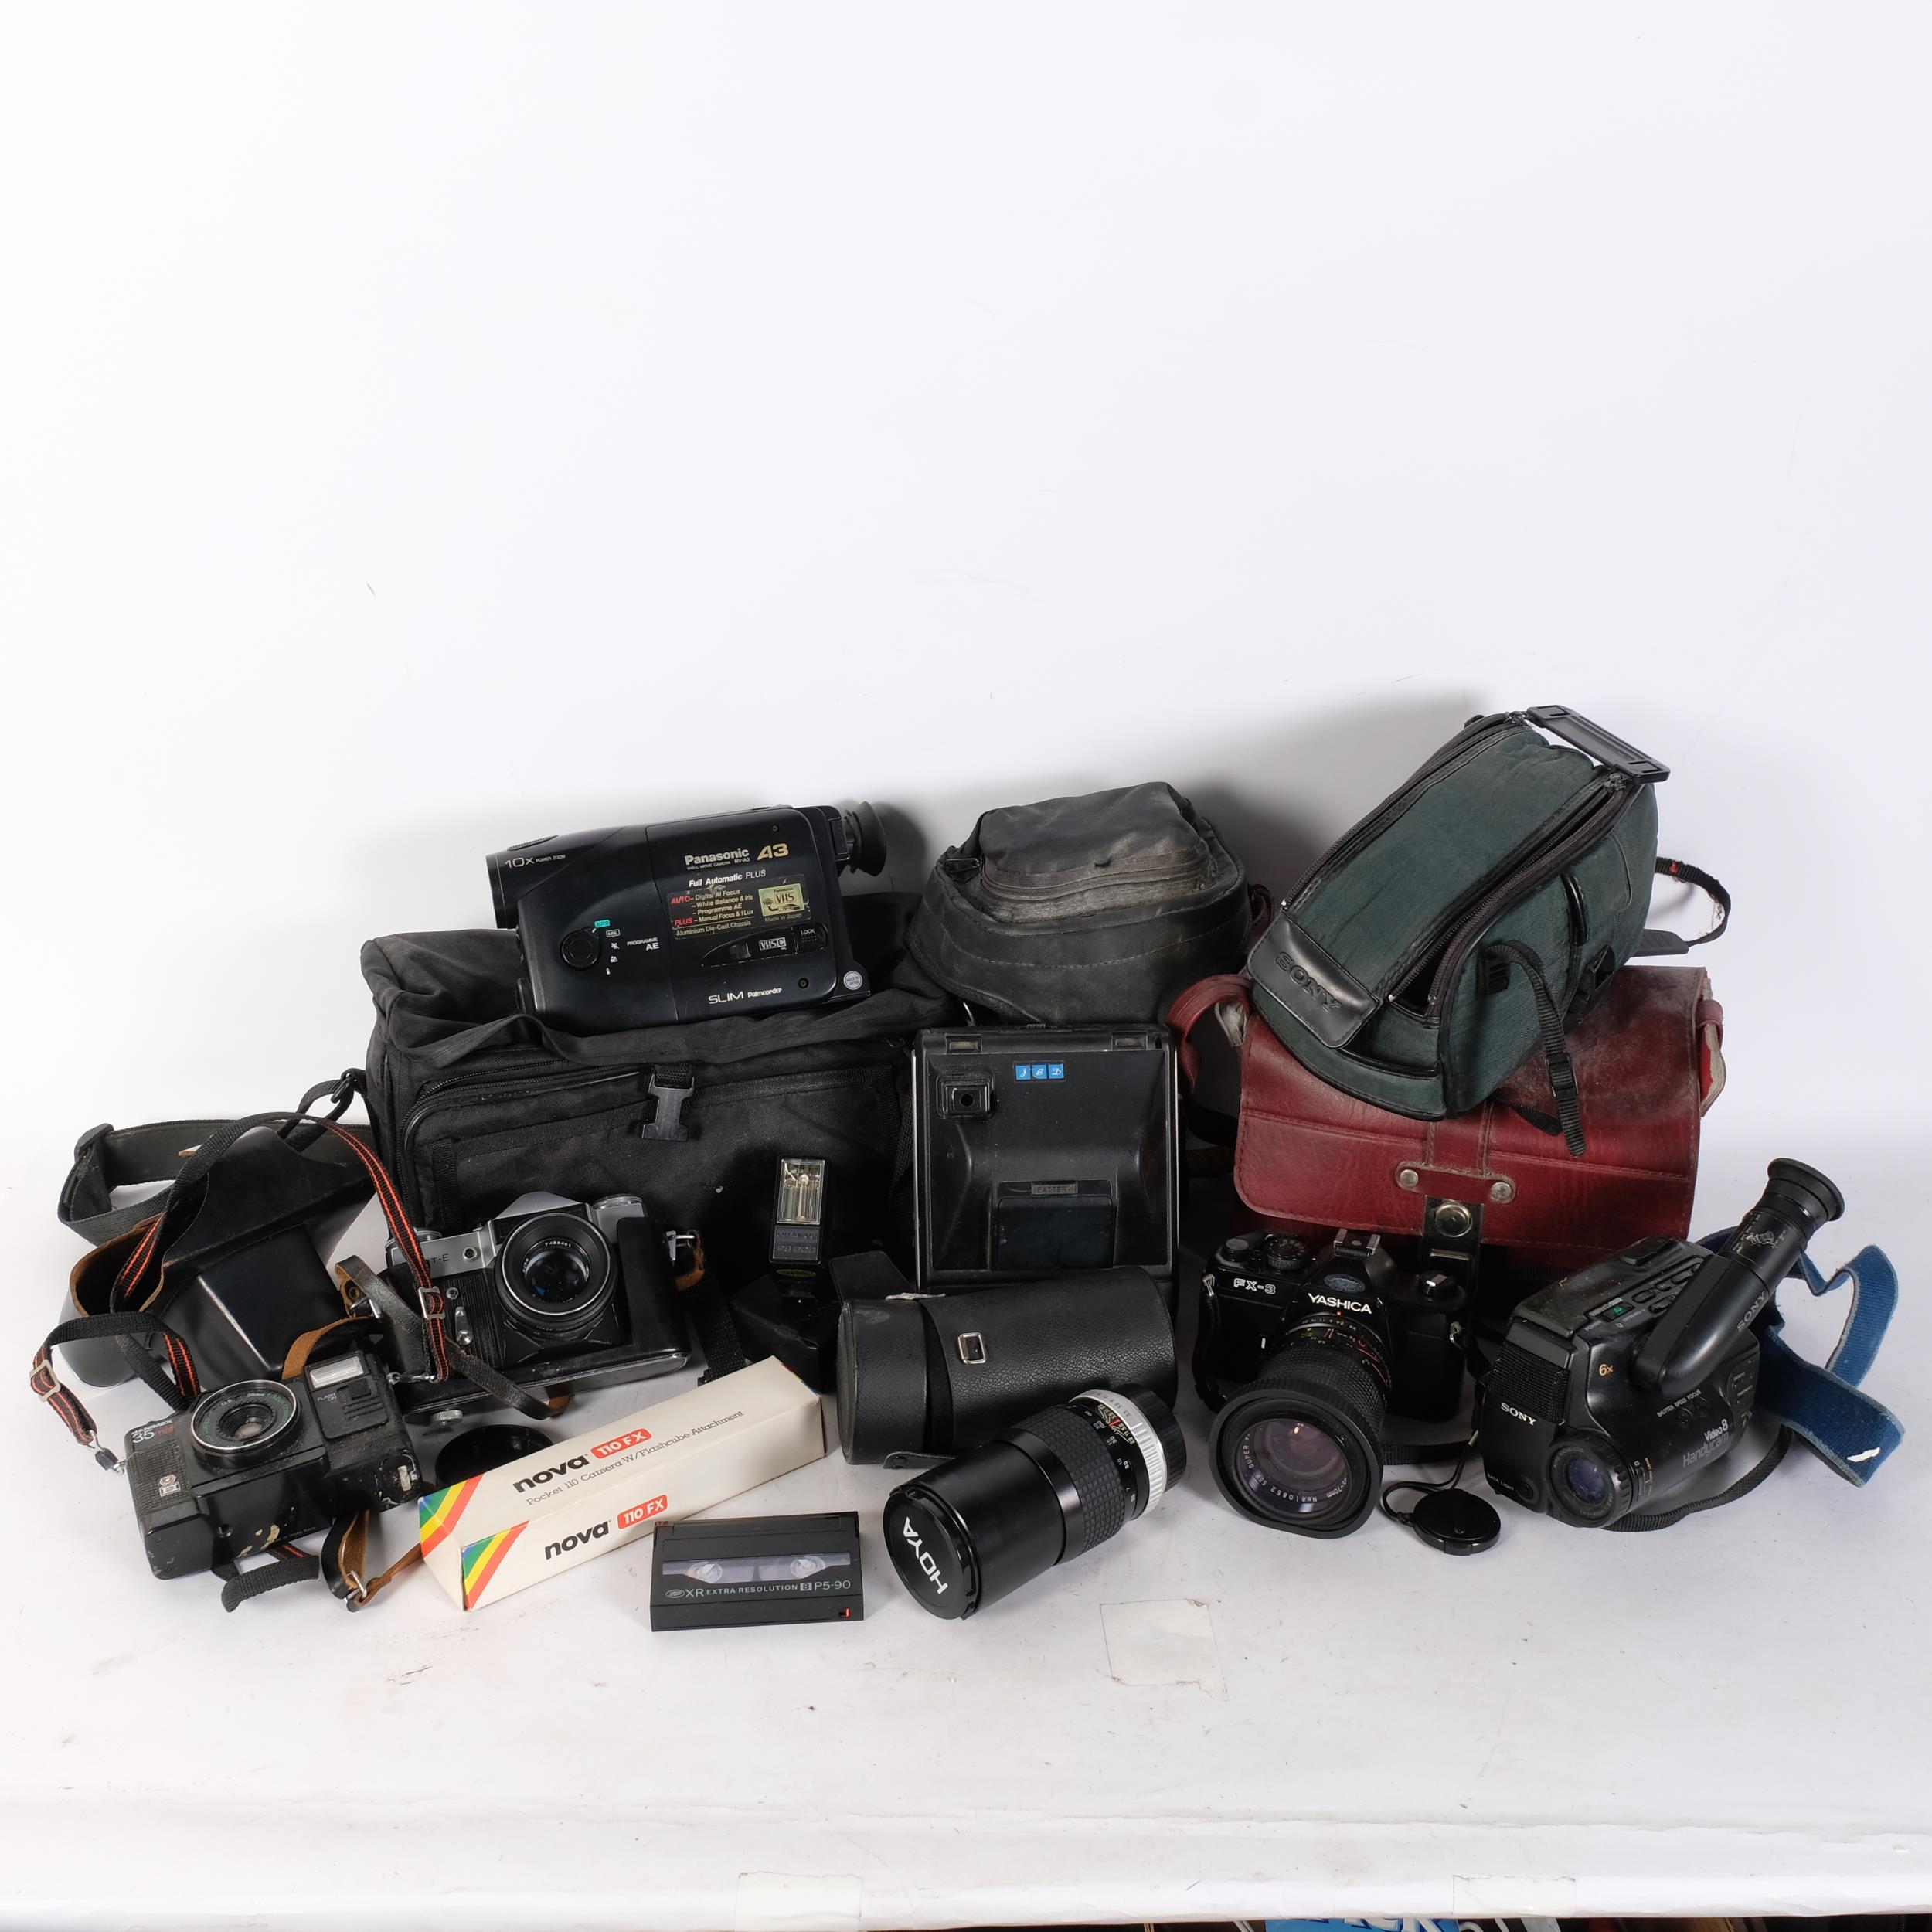 A quantity of Vintage cameras and handheld video recorders, with associated accessories, including a - Image 2 of 2